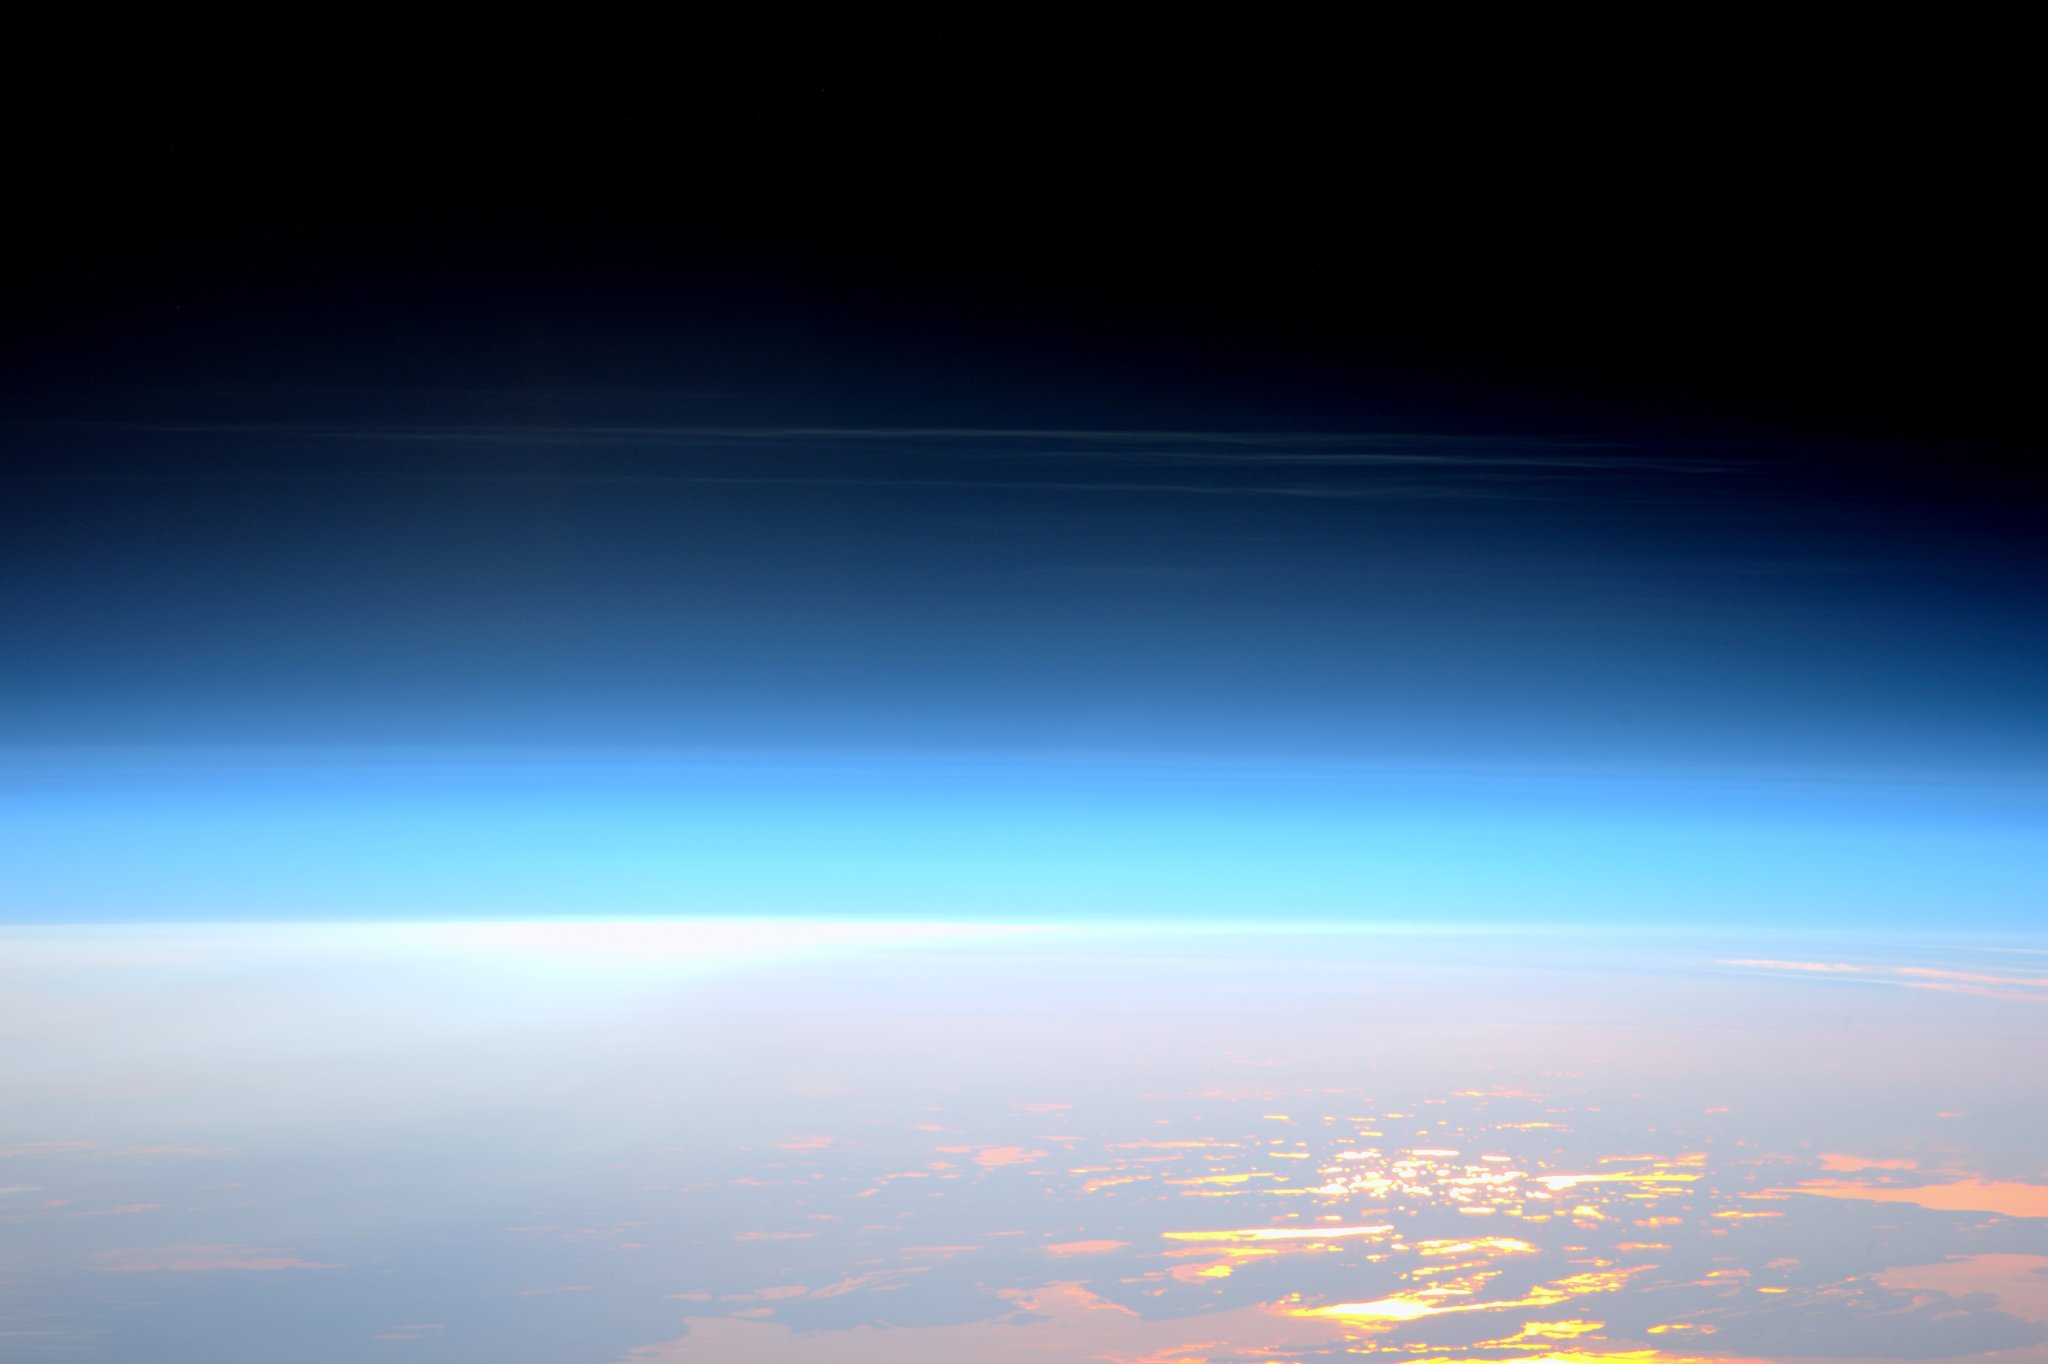 A rare high altitude noctilucent clouds as viewed from the International Space Station.